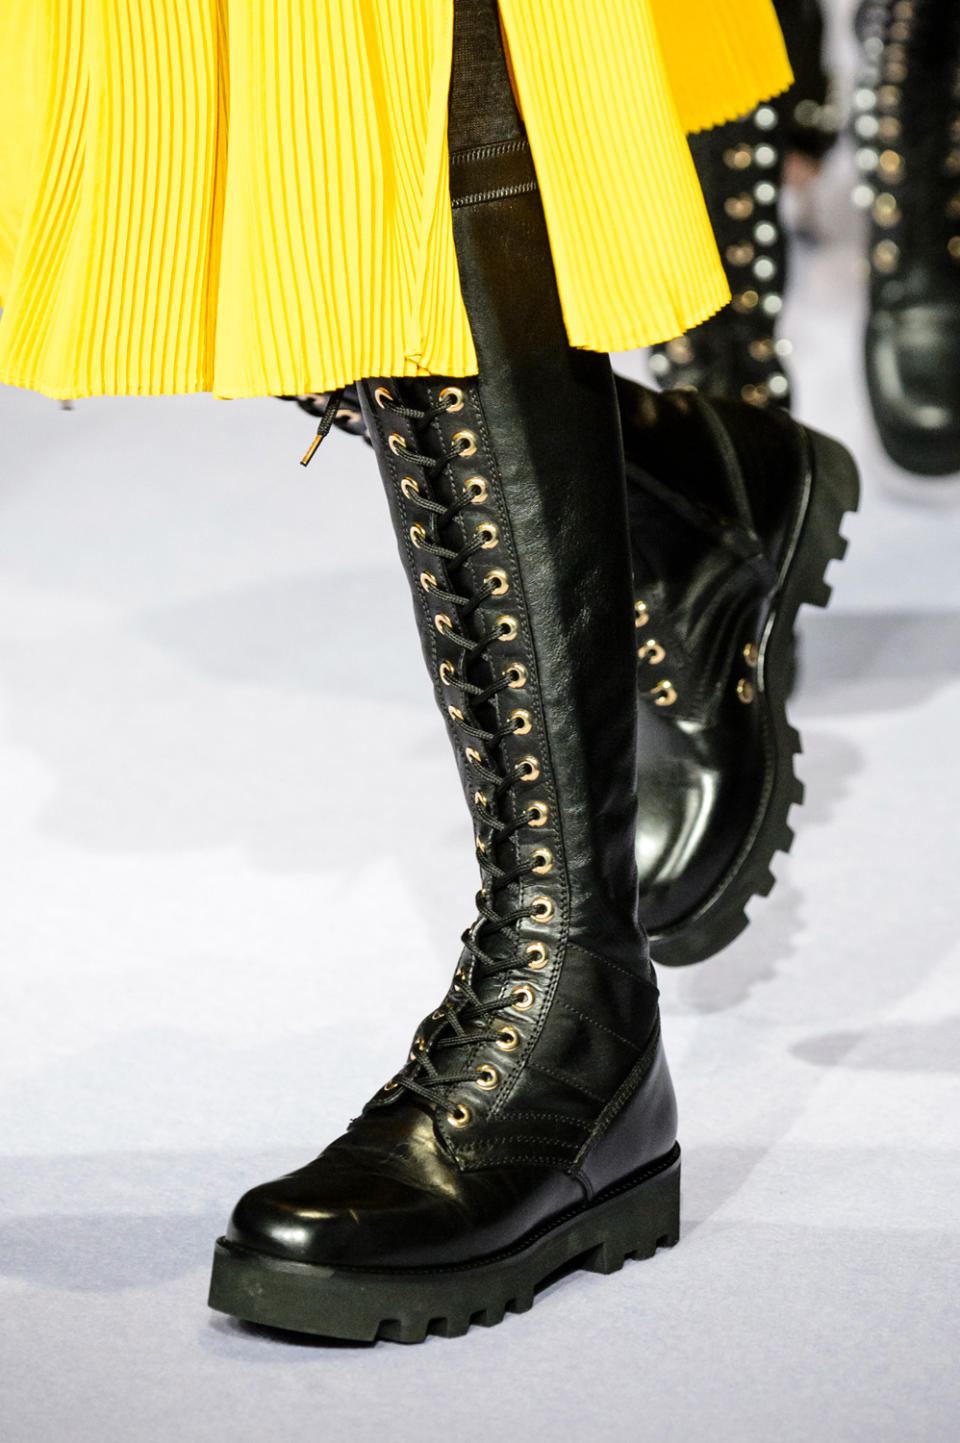 Lace-Up Knee-High Black Leather Boots, Altuzarra Fall/Winter 2017